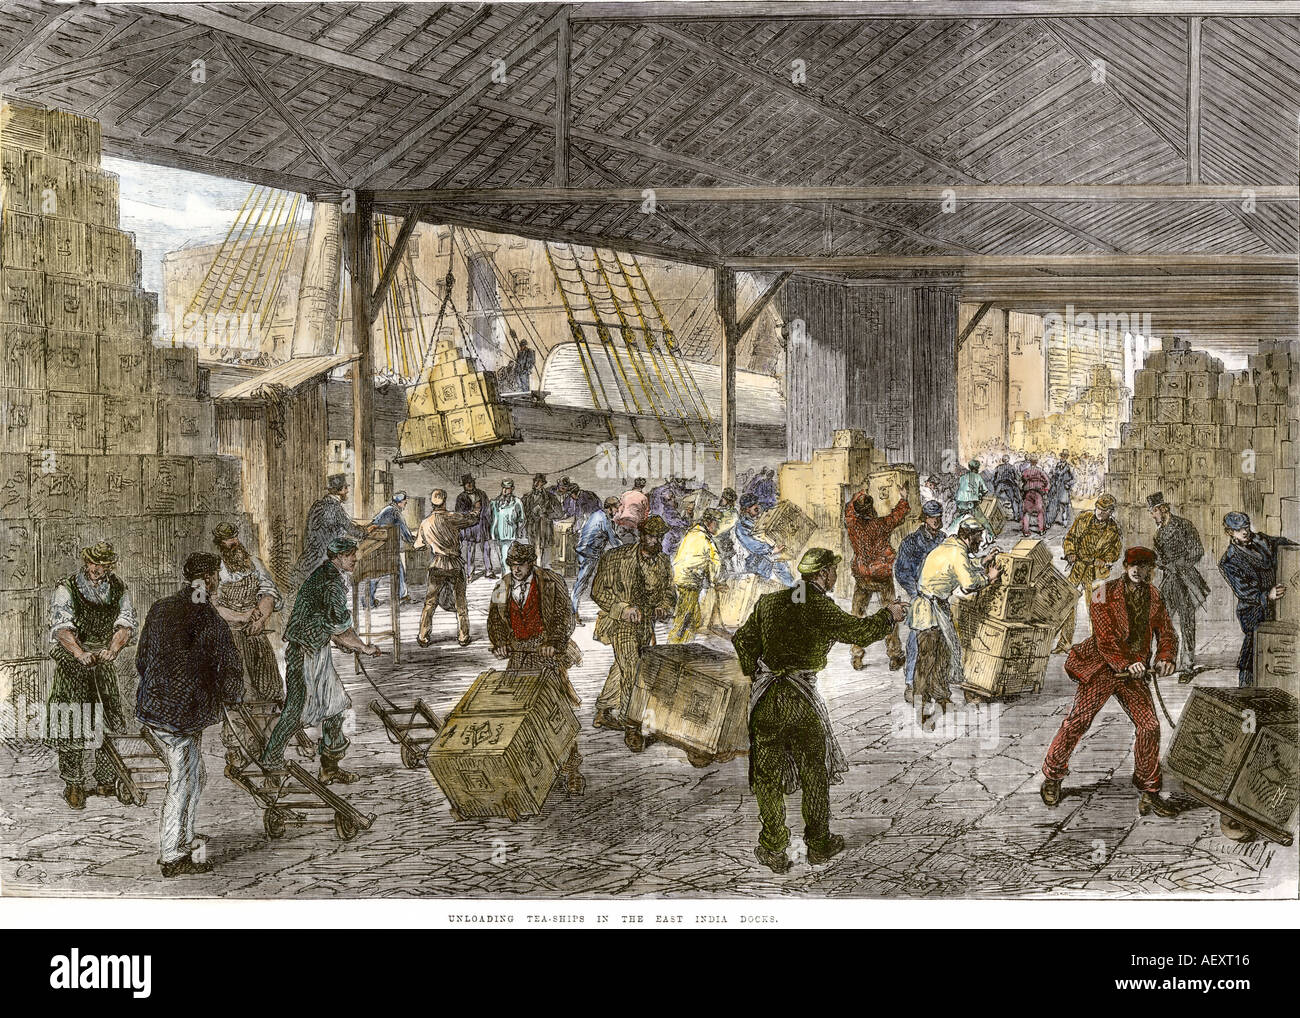 Unloading tea ships in the British East India Company docks in London 1860s. Hand-colored woodcut Stock Photo